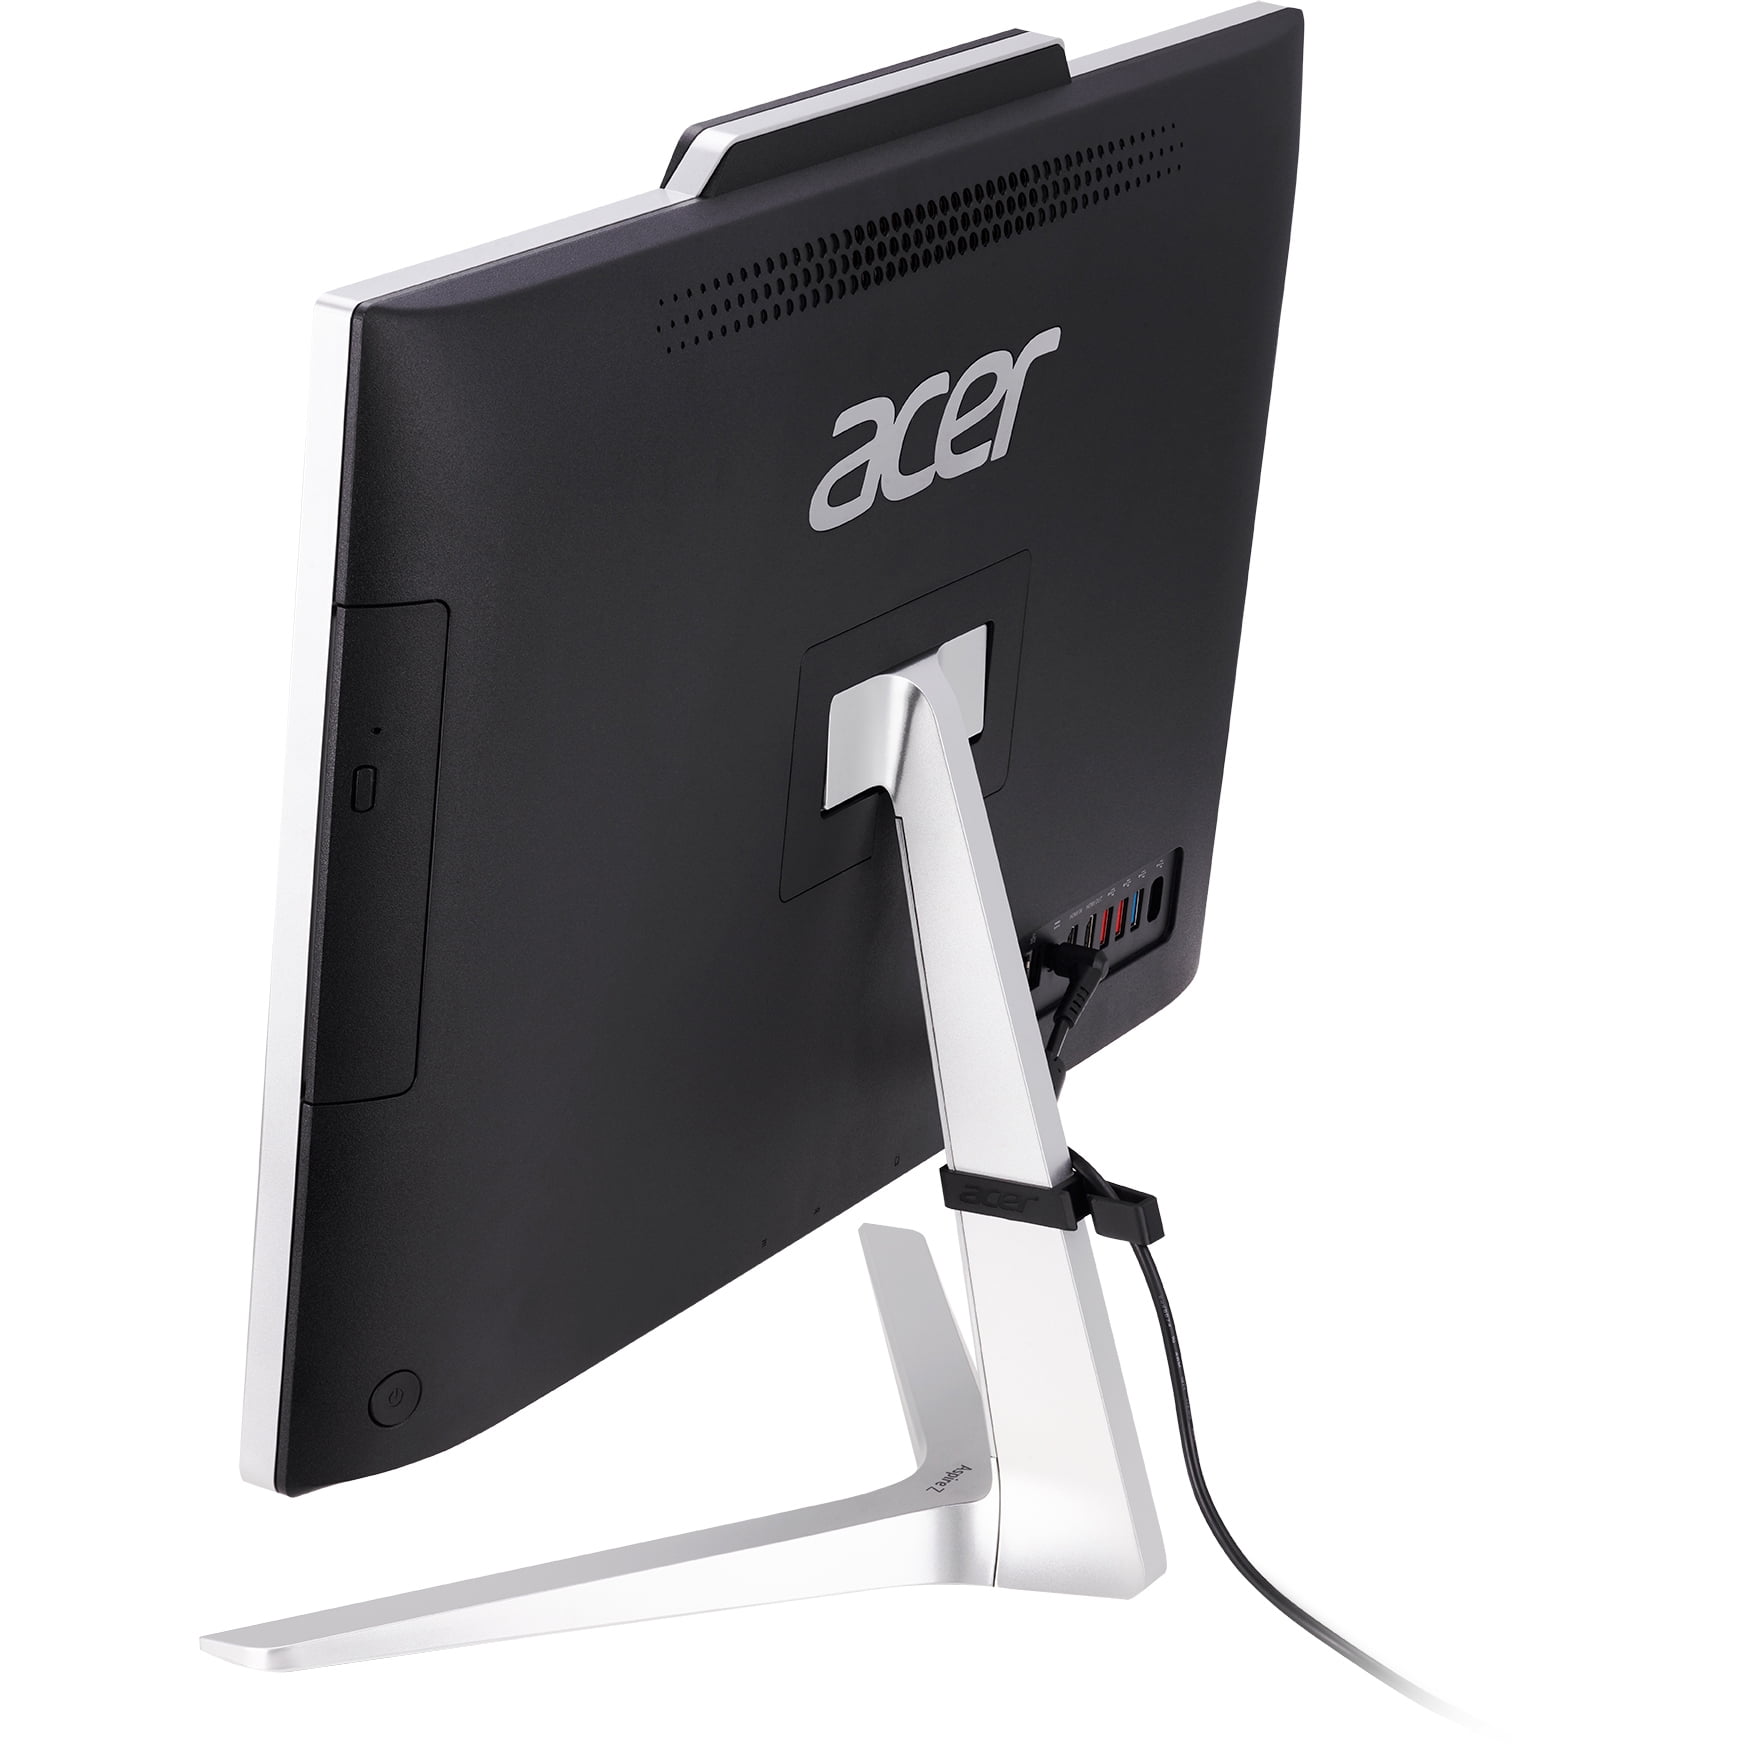 ACER Aspire Z24-890 All-in-One Computer Intel Core i5-9400T - 8GB - 1TB HDD  - DVD-Writer - 23.8